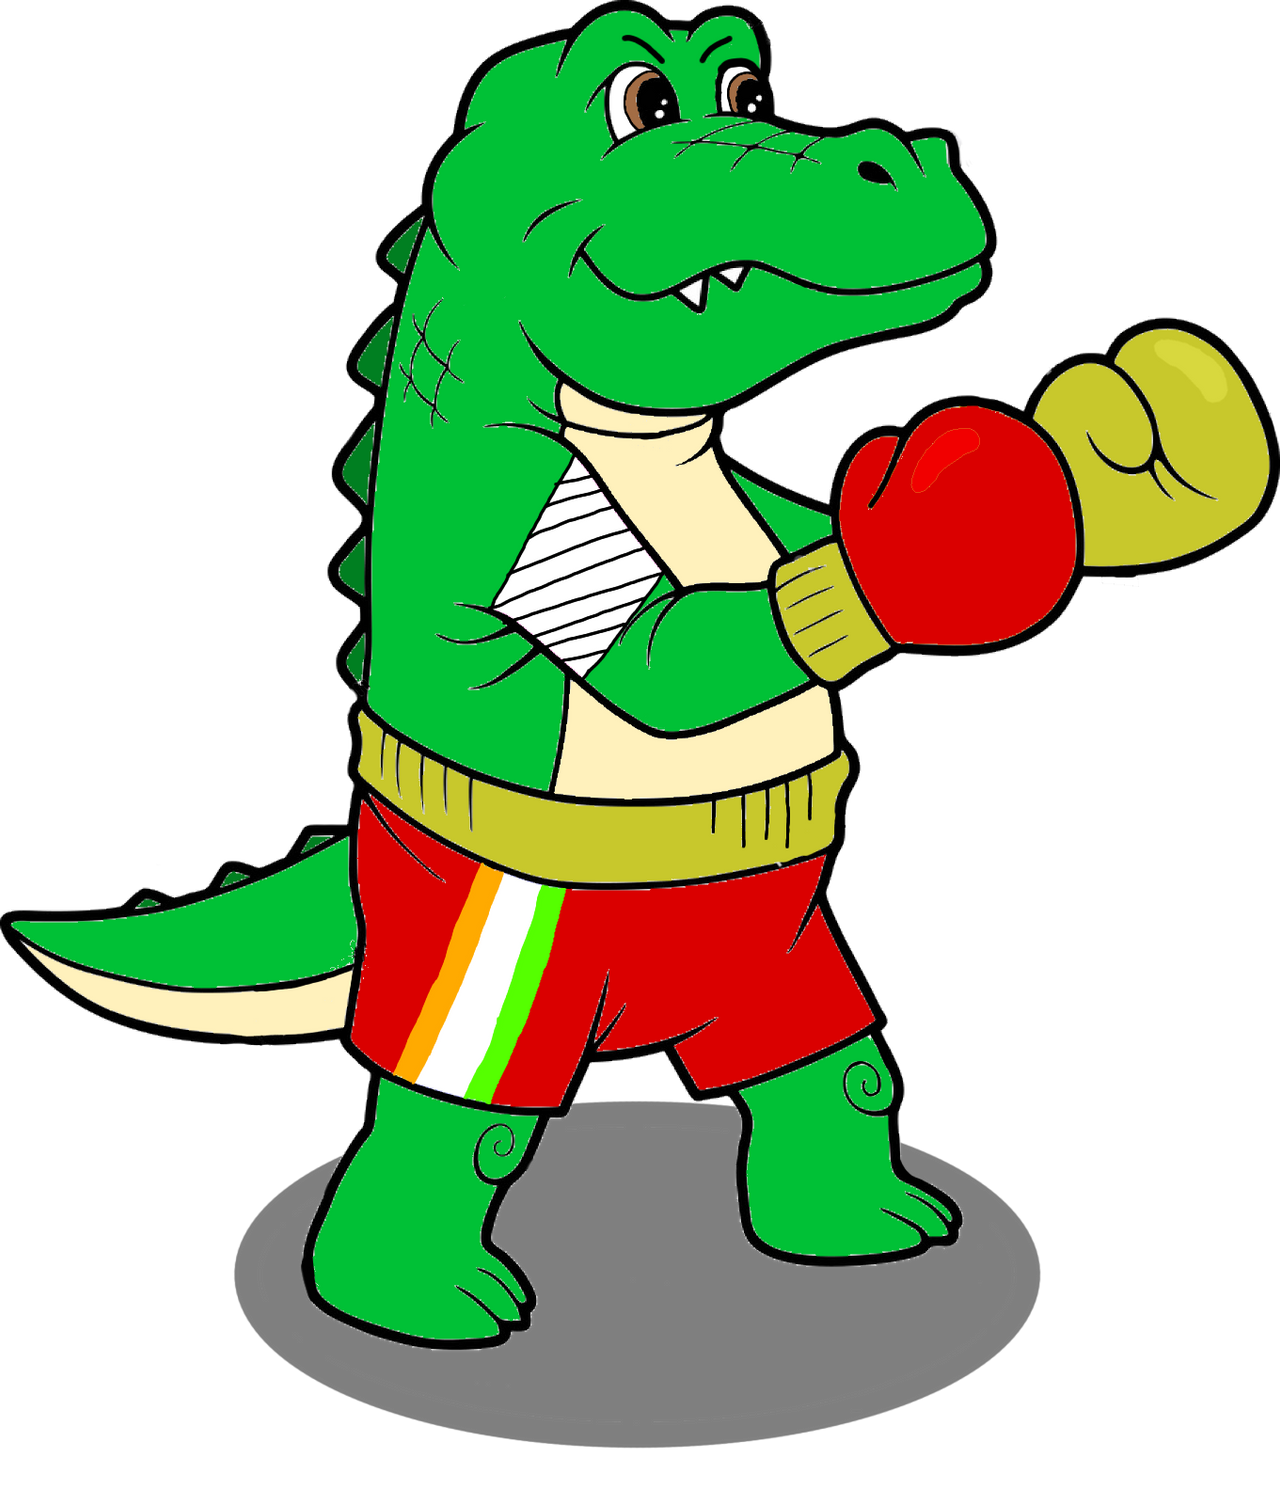 crocodile_boxer_for_a_friend_by_greymonfire108_dg6sdf4-fullview.png